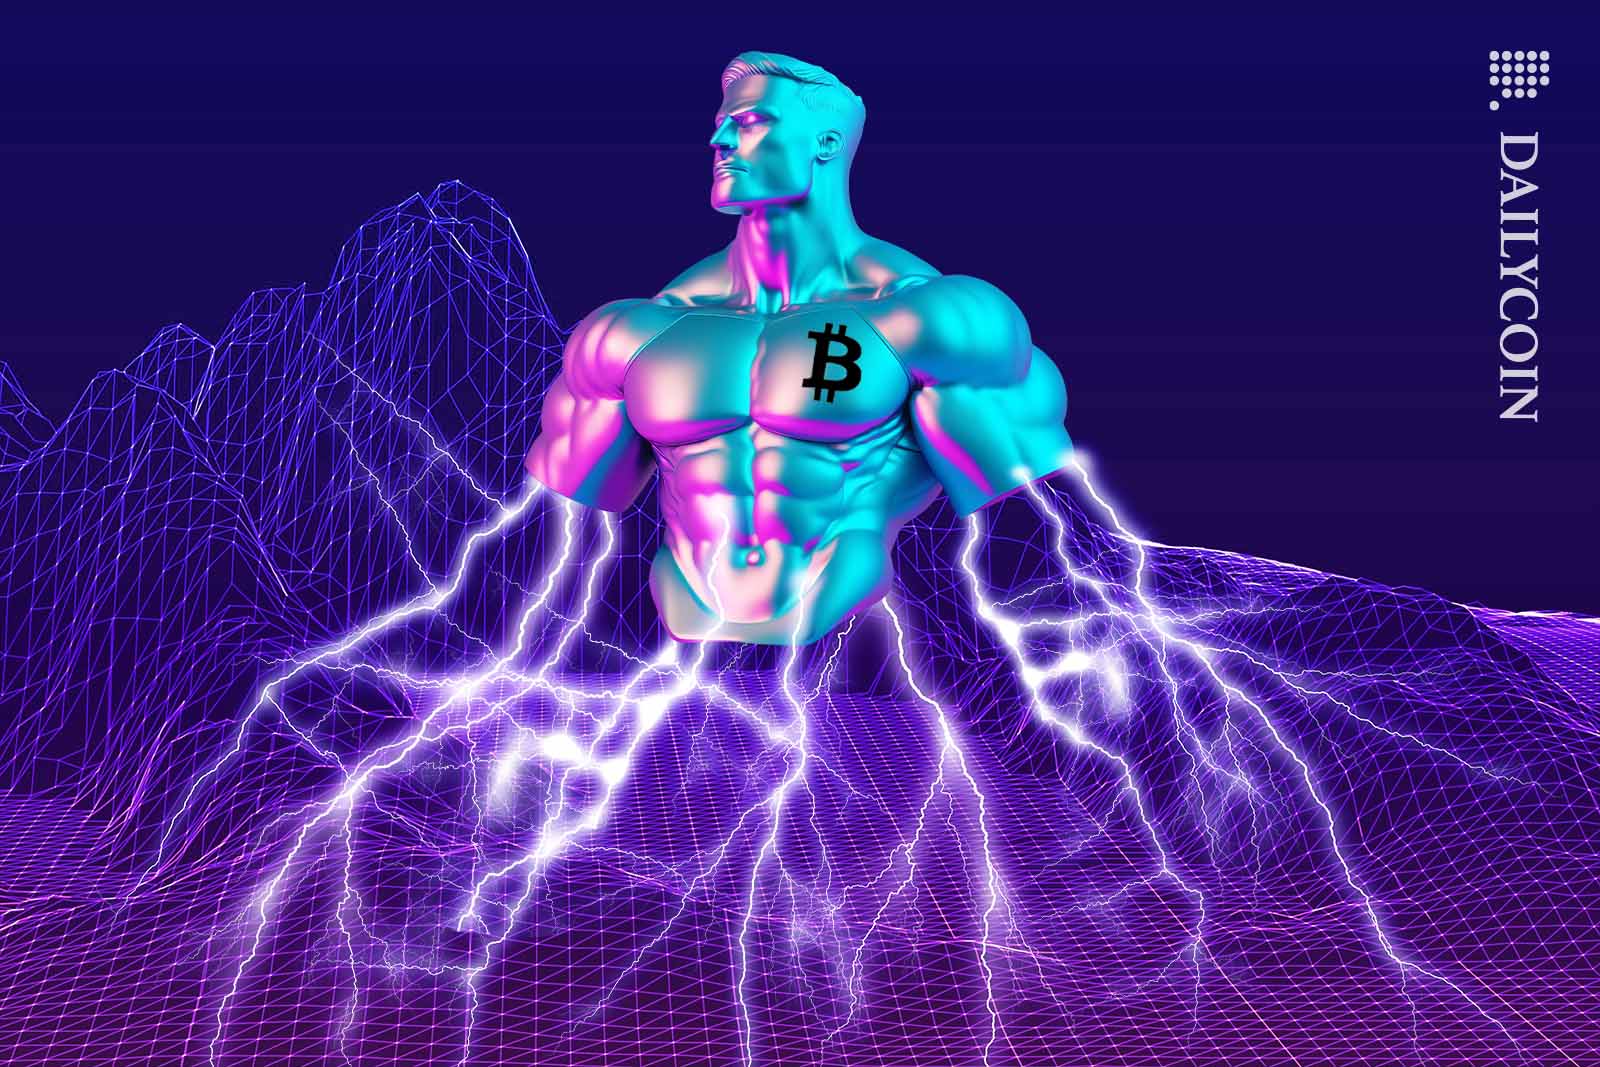 Iridescent Bitcoin statue being charged up by lightnings.